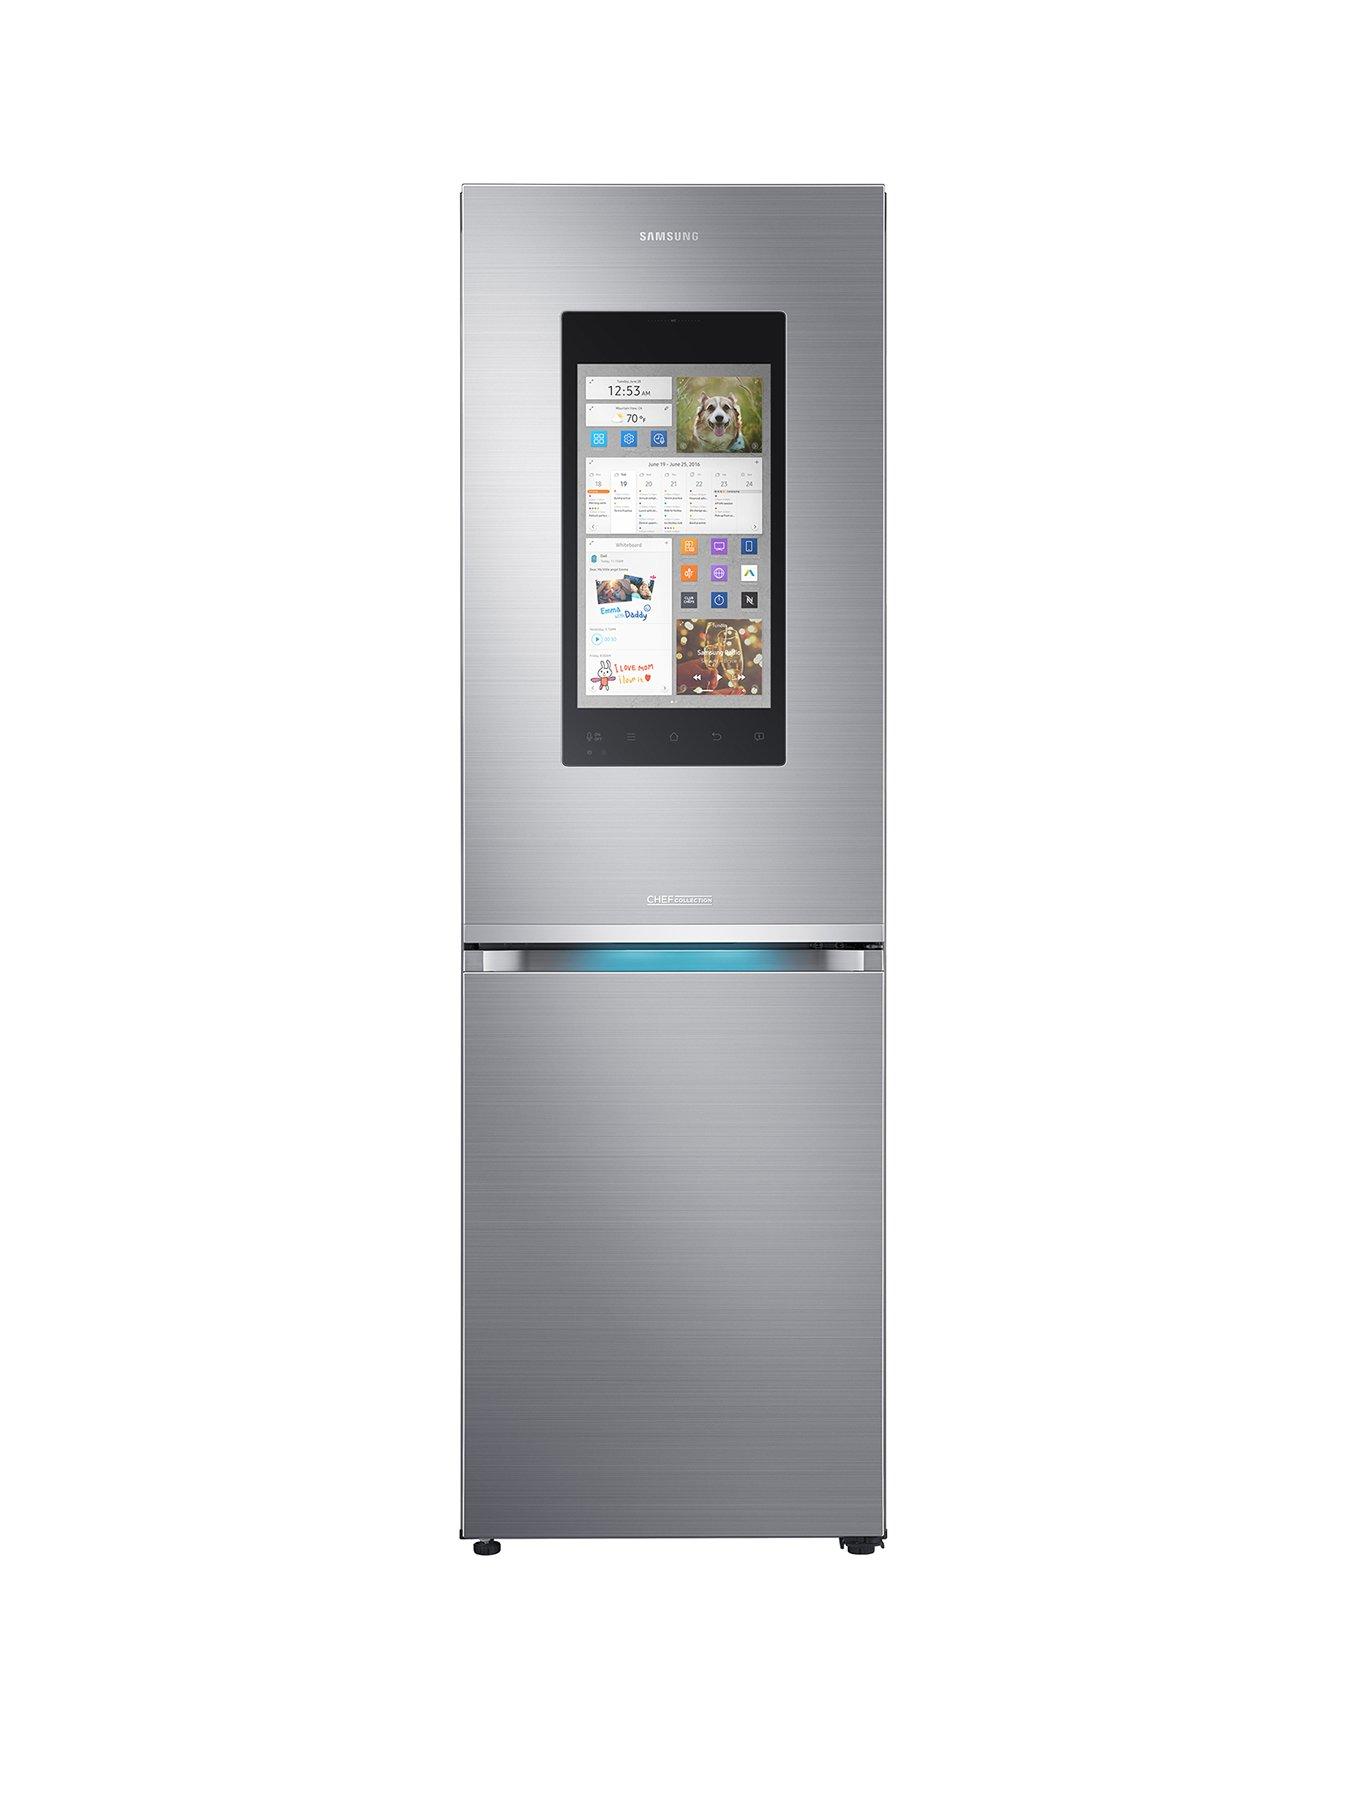 Samsung Rb38M7998S4/Eu Family Hub Fridge Freezer With 5 Year Samsung Parts And Labour Warranty – Stainless Steel